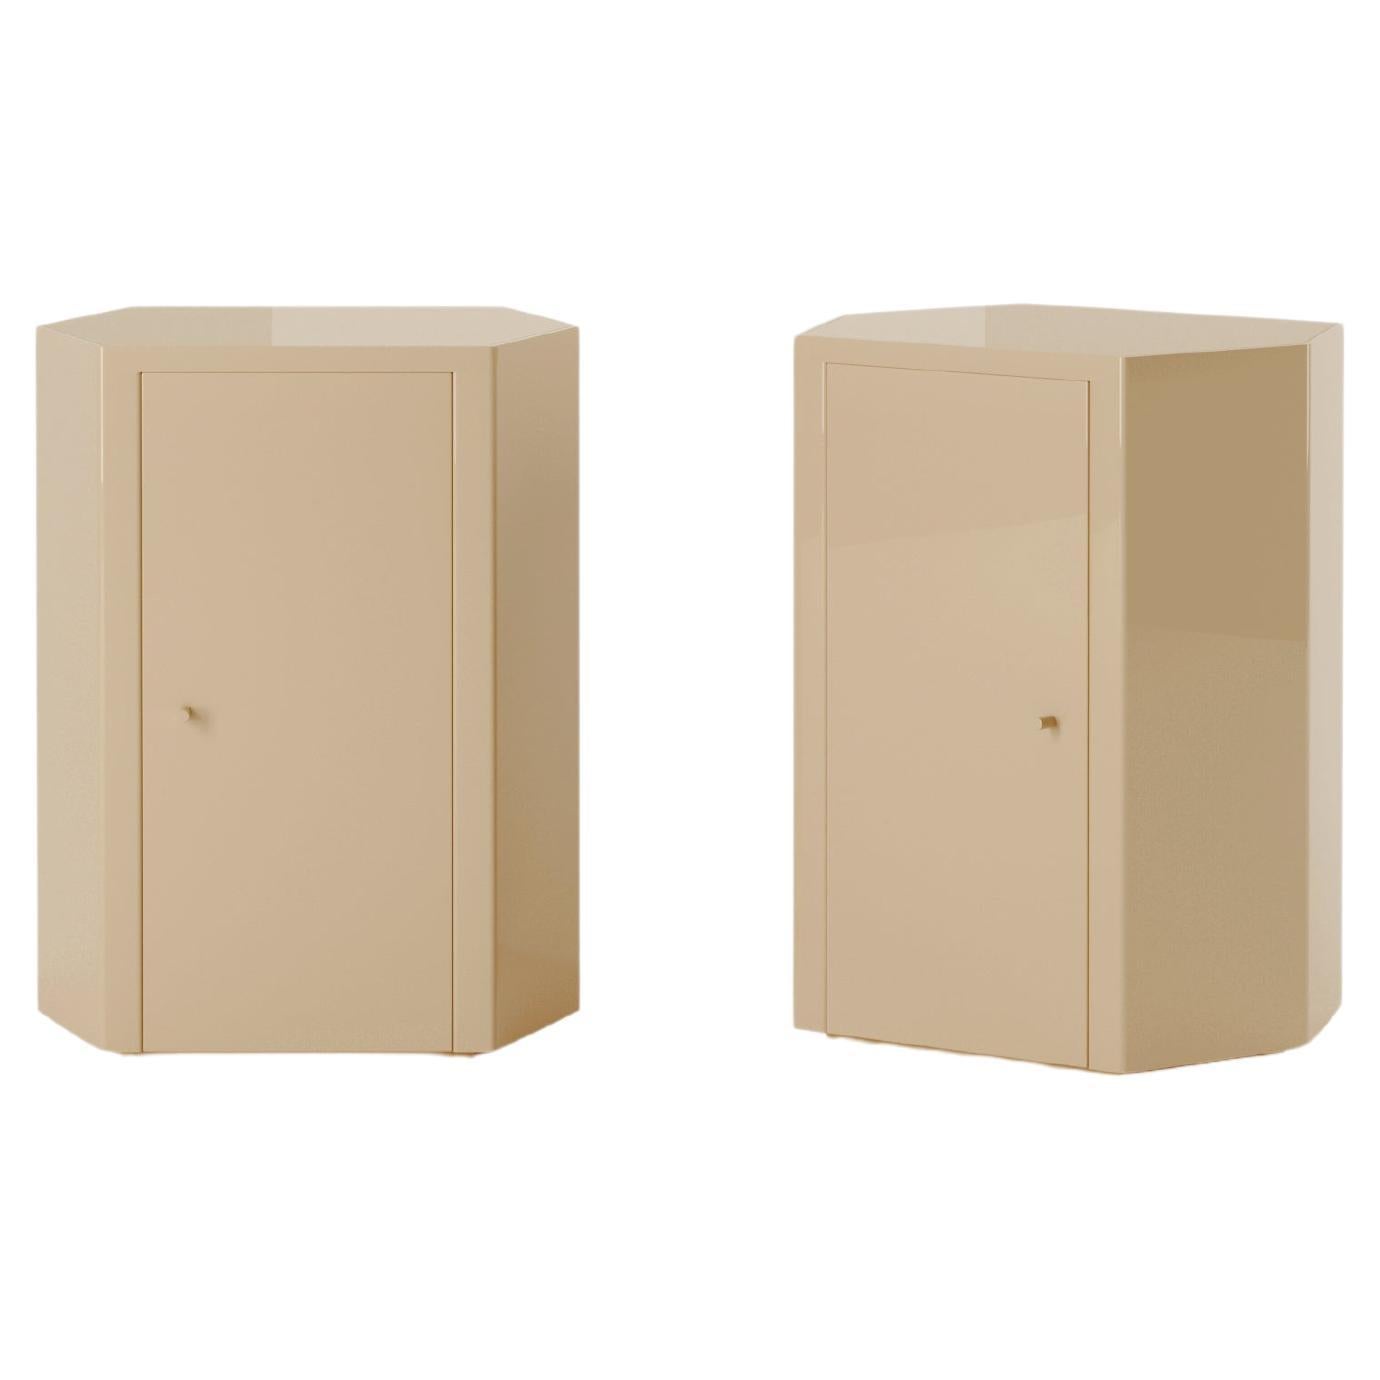 Pair of Park Night Stands in Sand Beige Lacquer by Yaniv Chen for Lemon